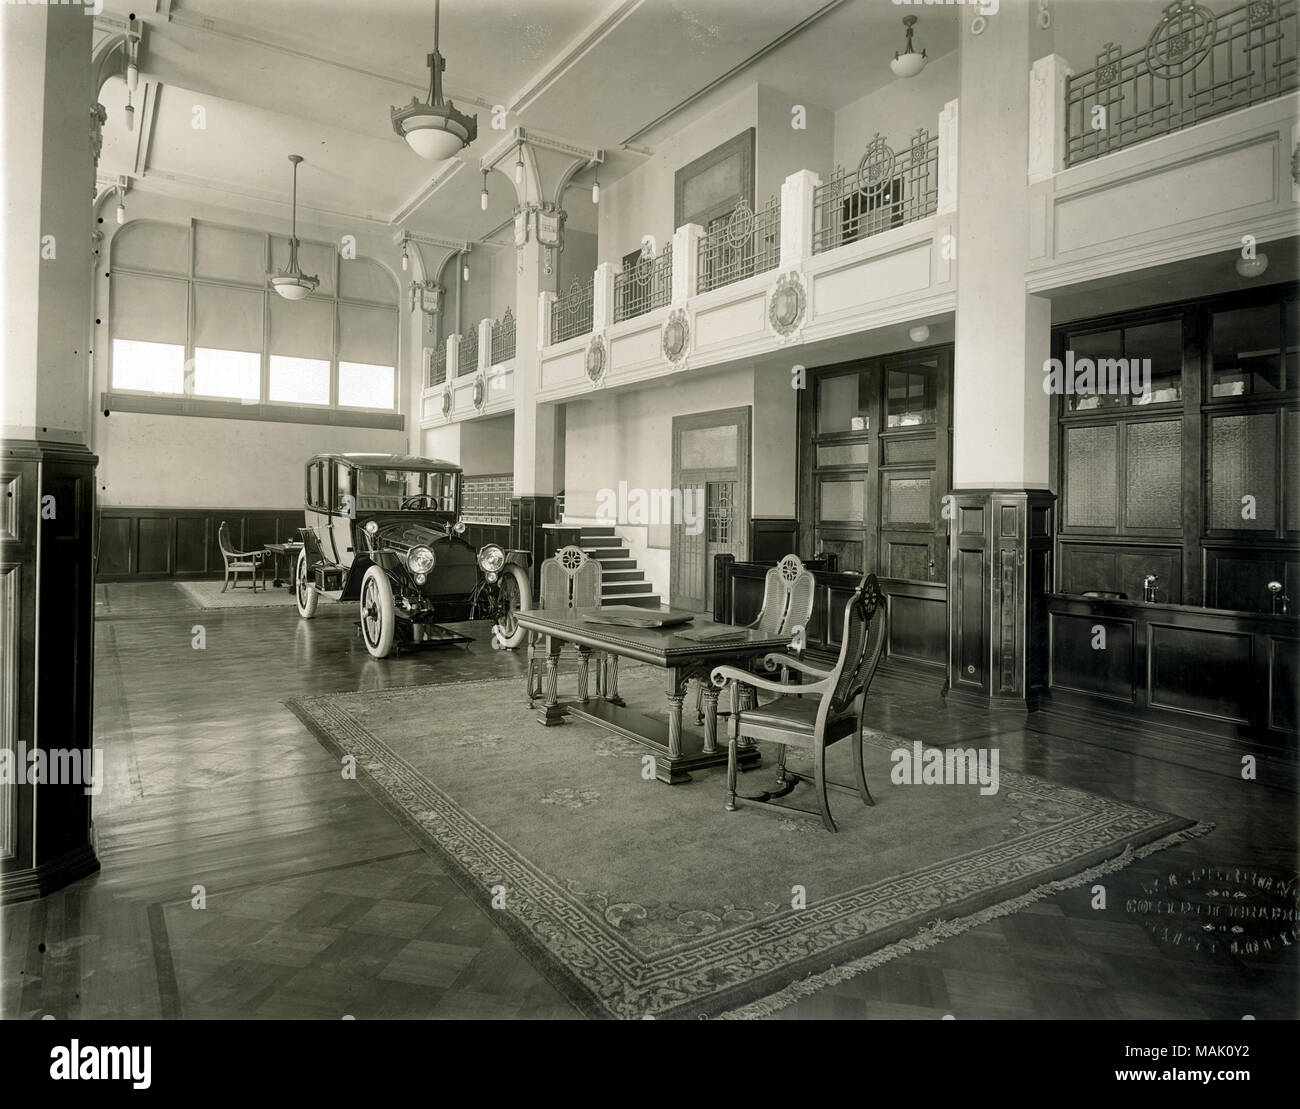 Title: Packard Missouri Motor Company, 2201 Locust Street. Interior view of lobby with mezzanine, showing display automobile next to carpeted area with table and chairs.  . circa 1916. W.C. Persons Stock Photo